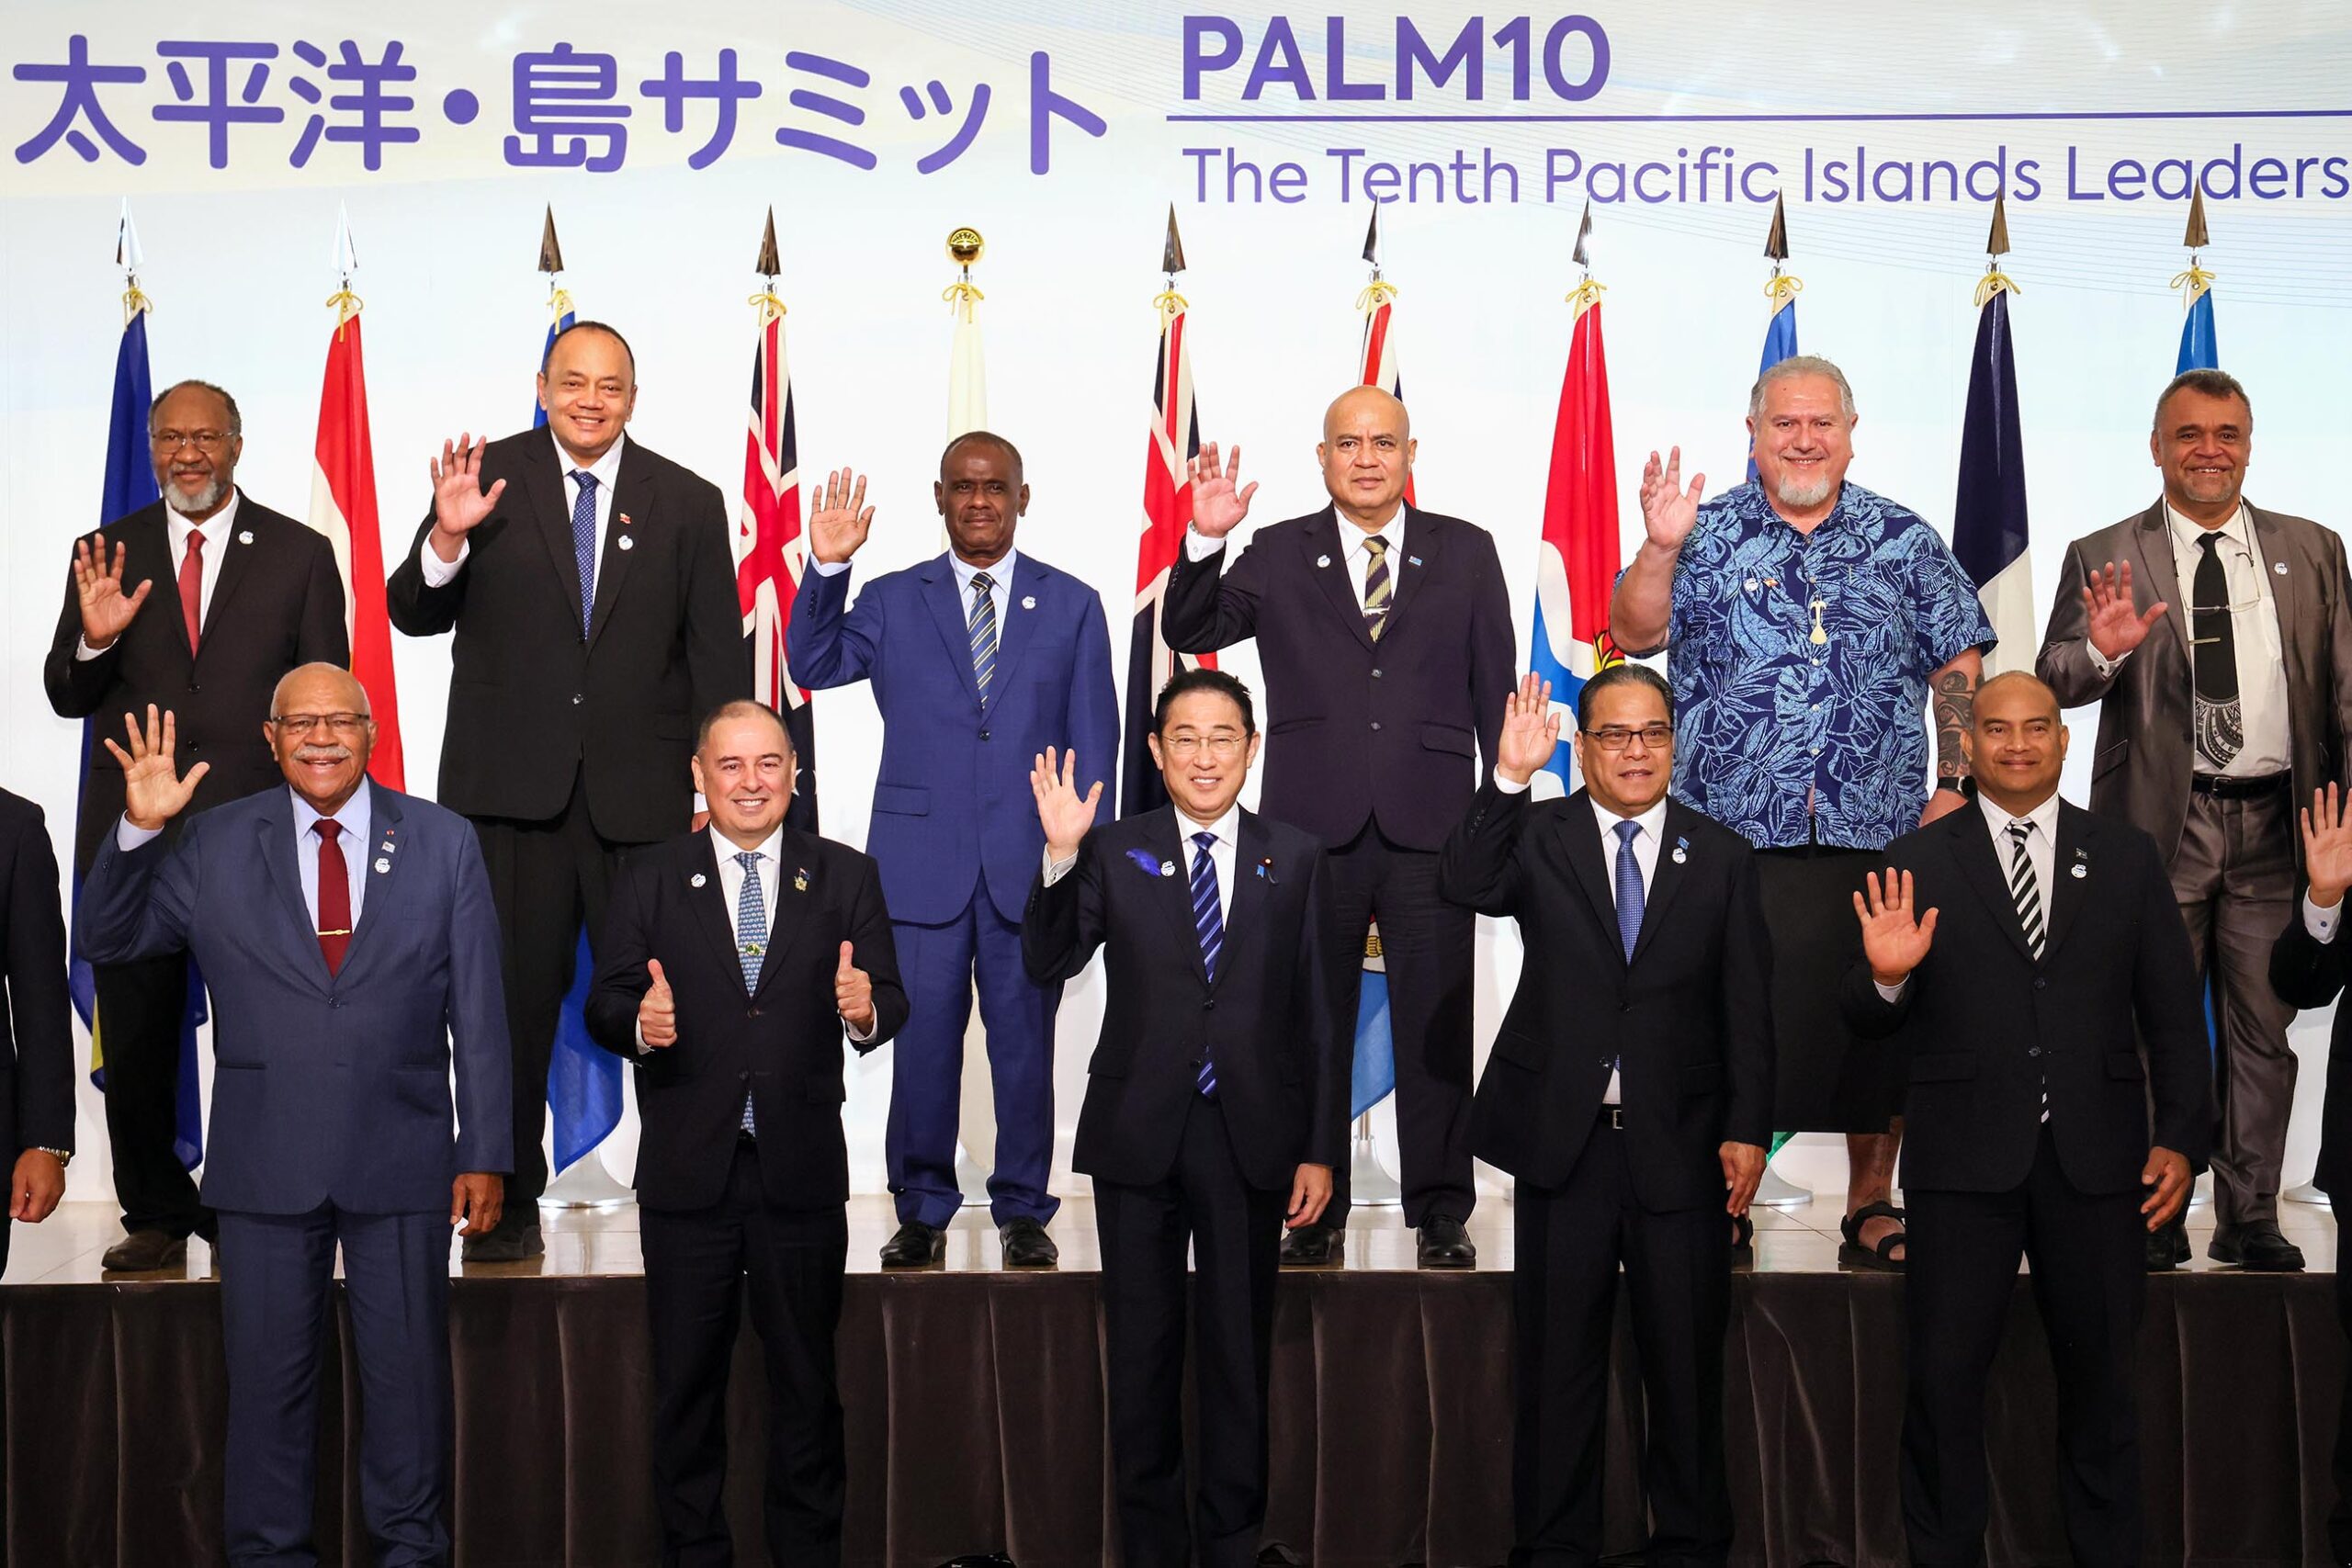 President Simina Attends the 10th Pacific Island Leaders Meeting (PALM10) ; Meets with Prime Minister Kishida; and Visits Emperor Naruhito at the Imperial Palace